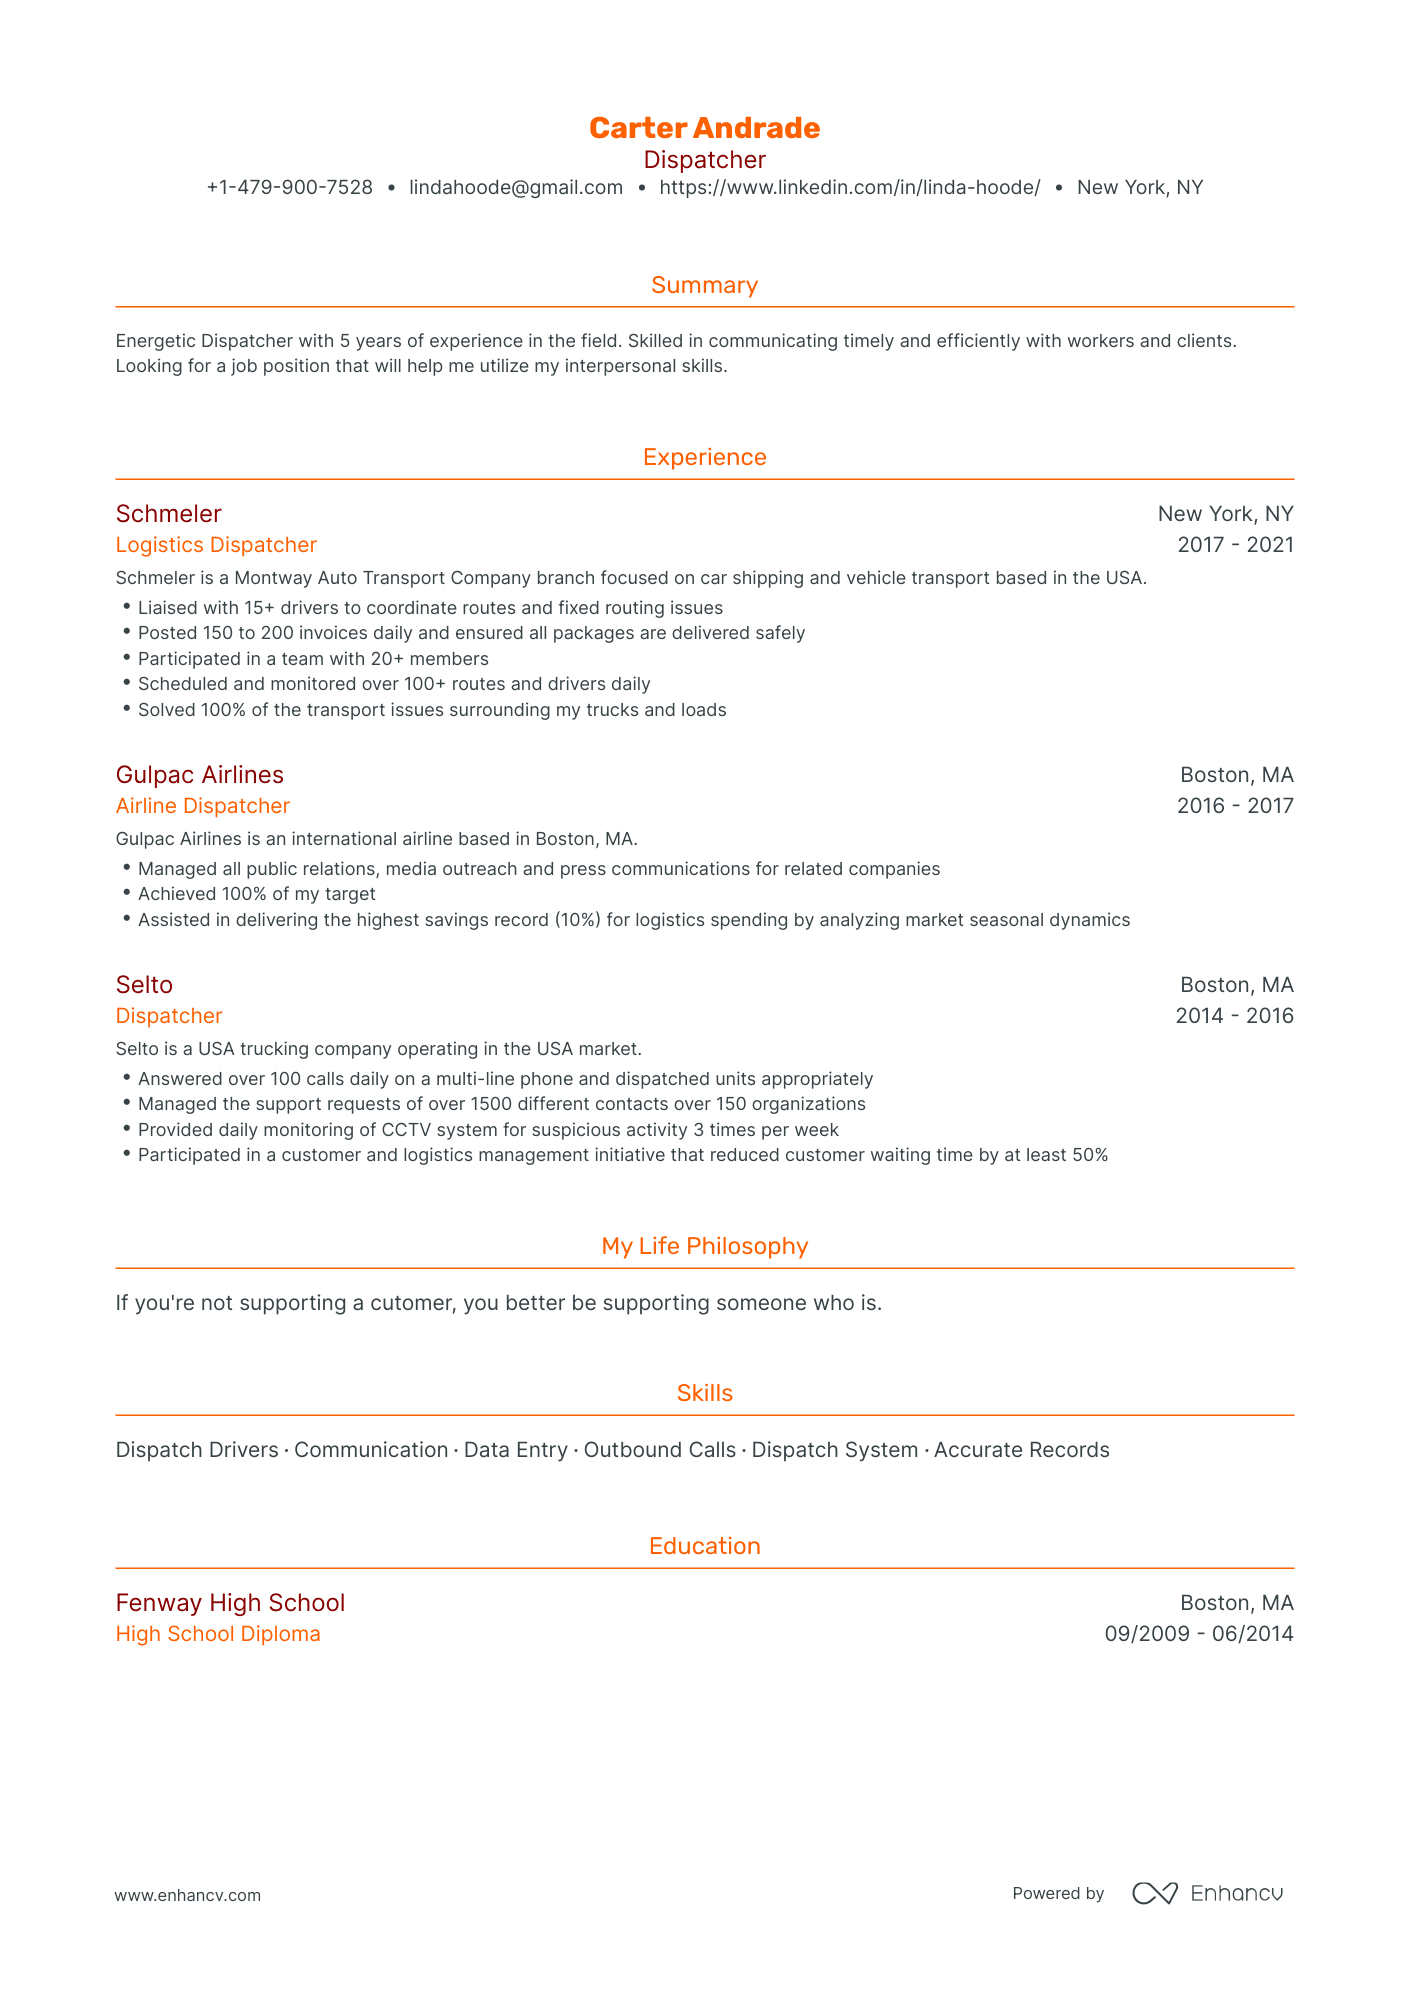 Traditional Dispatcher Resume Template